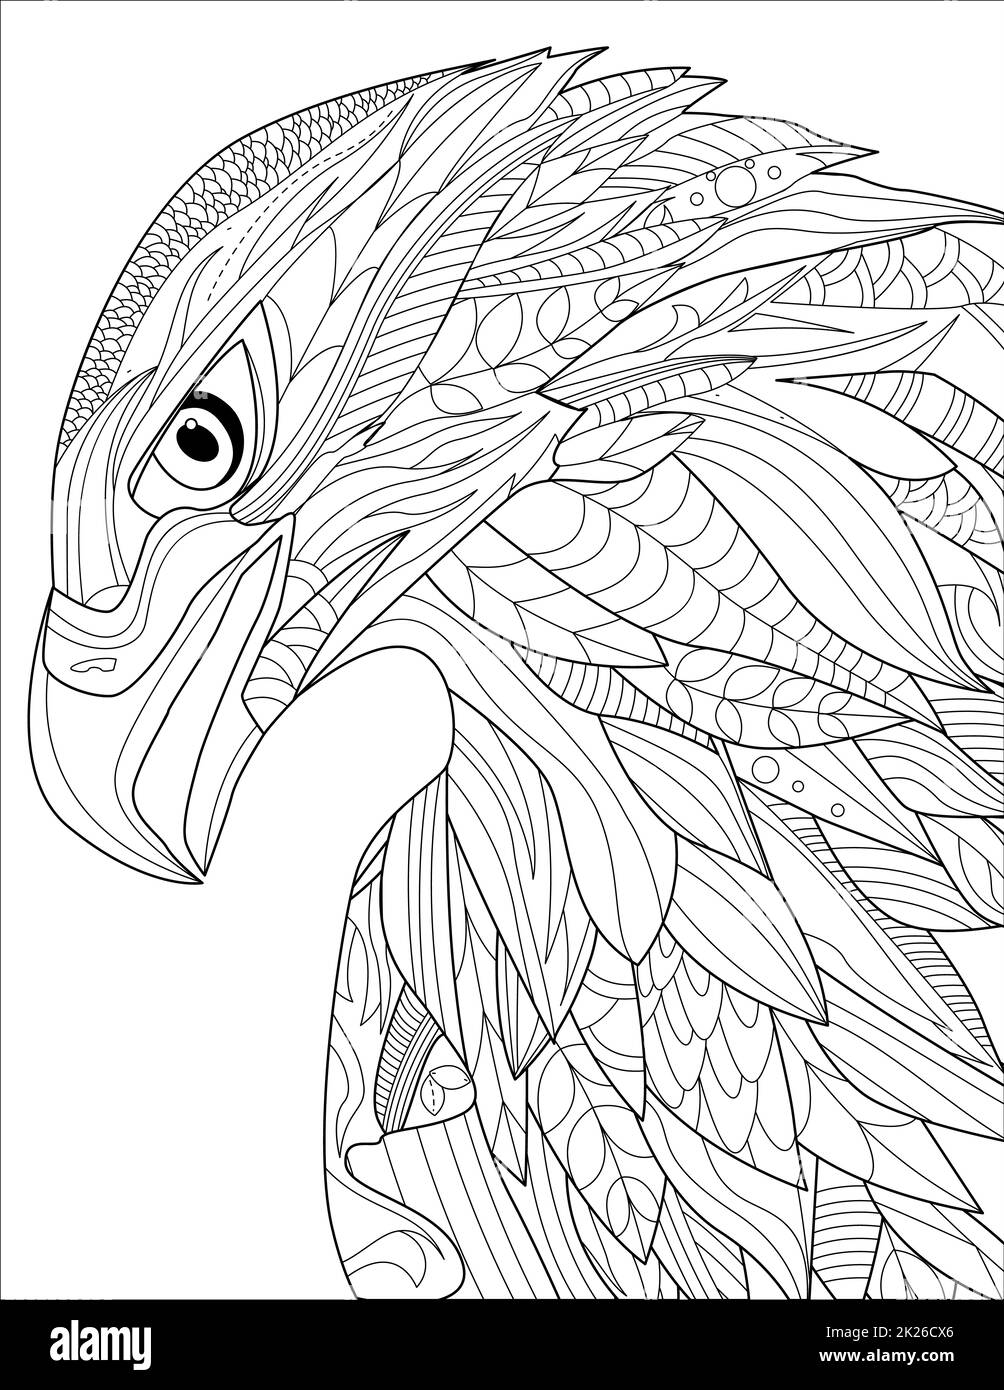 Eagle Head Line Drawing With Geometric Detailed Coloring Book idea Stock Photo